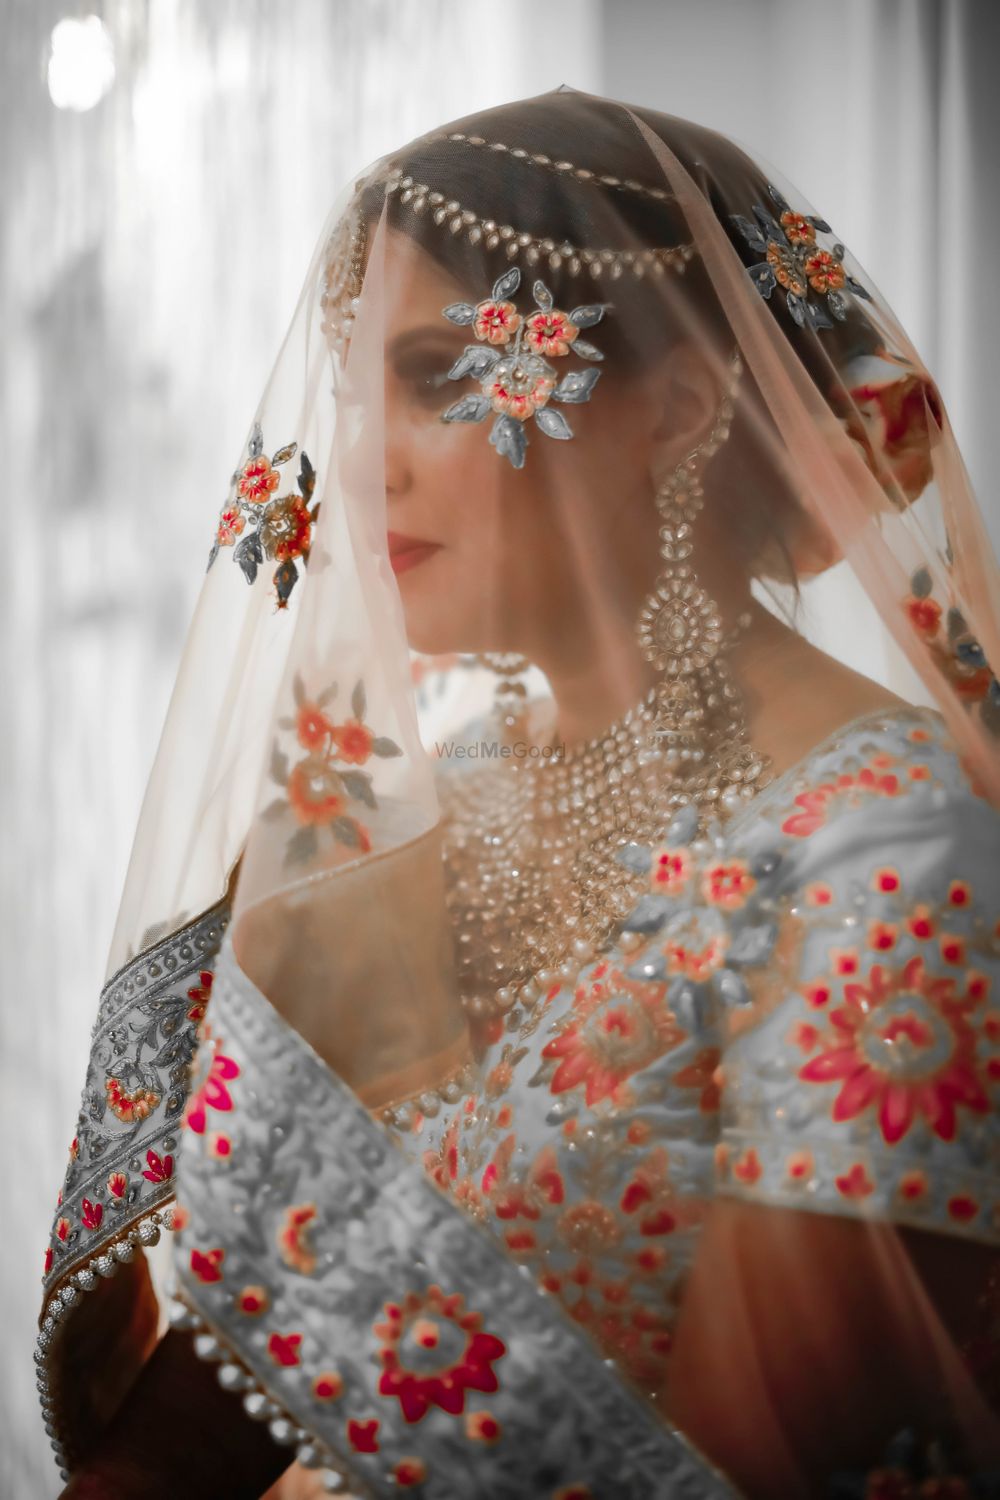 Photo From Bridal Shoot - By Filmeez 